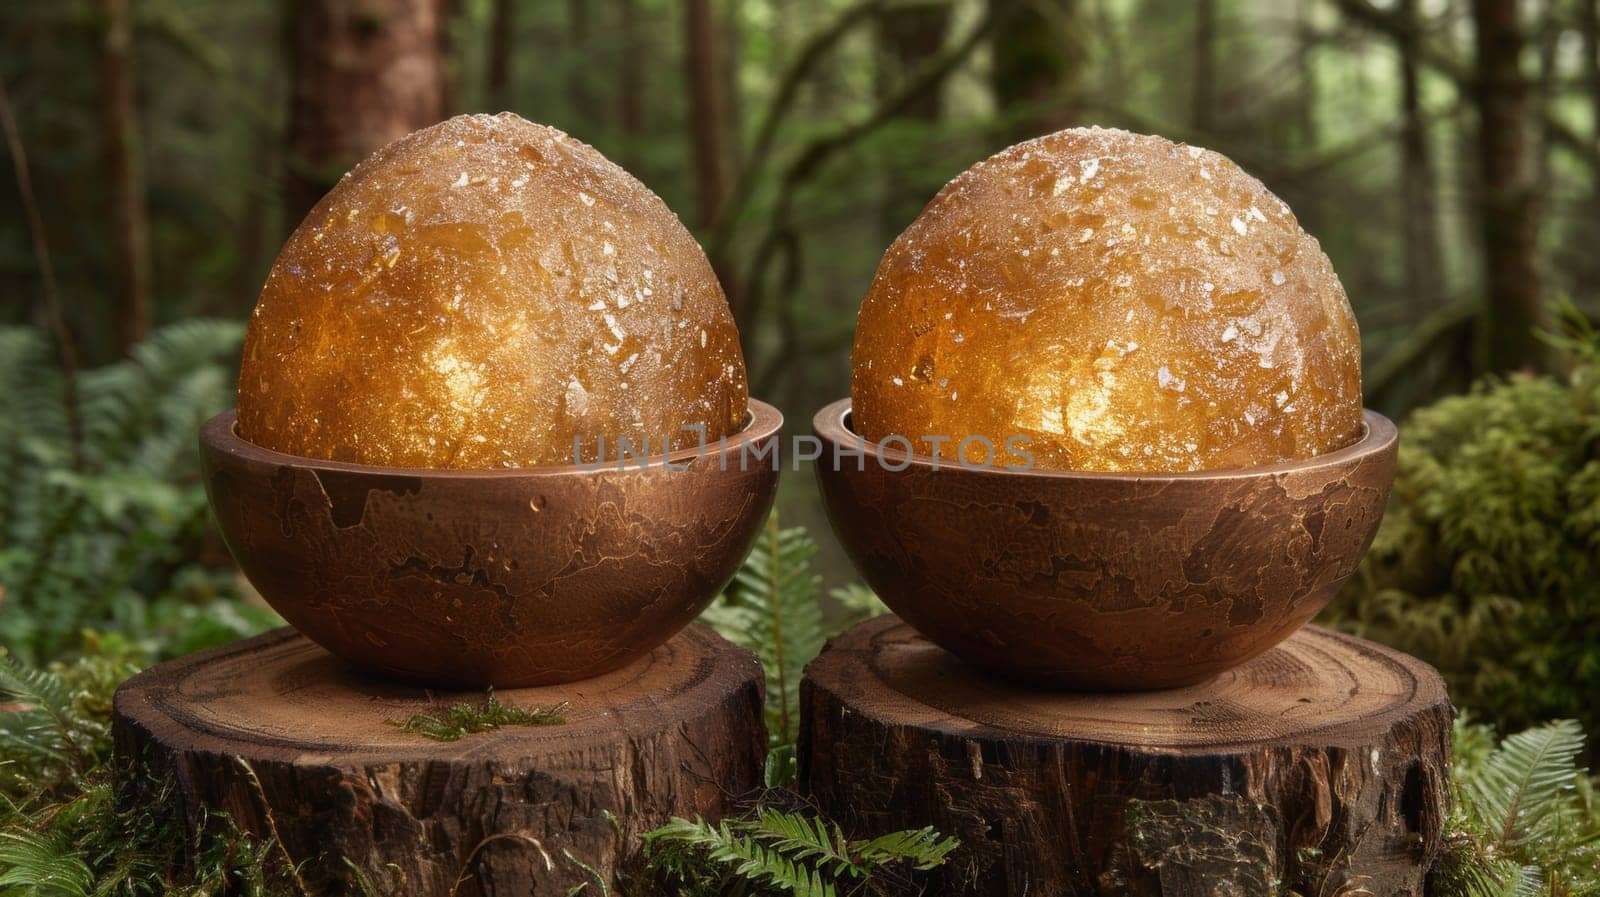 Two large eggs are sitting on top of some logs